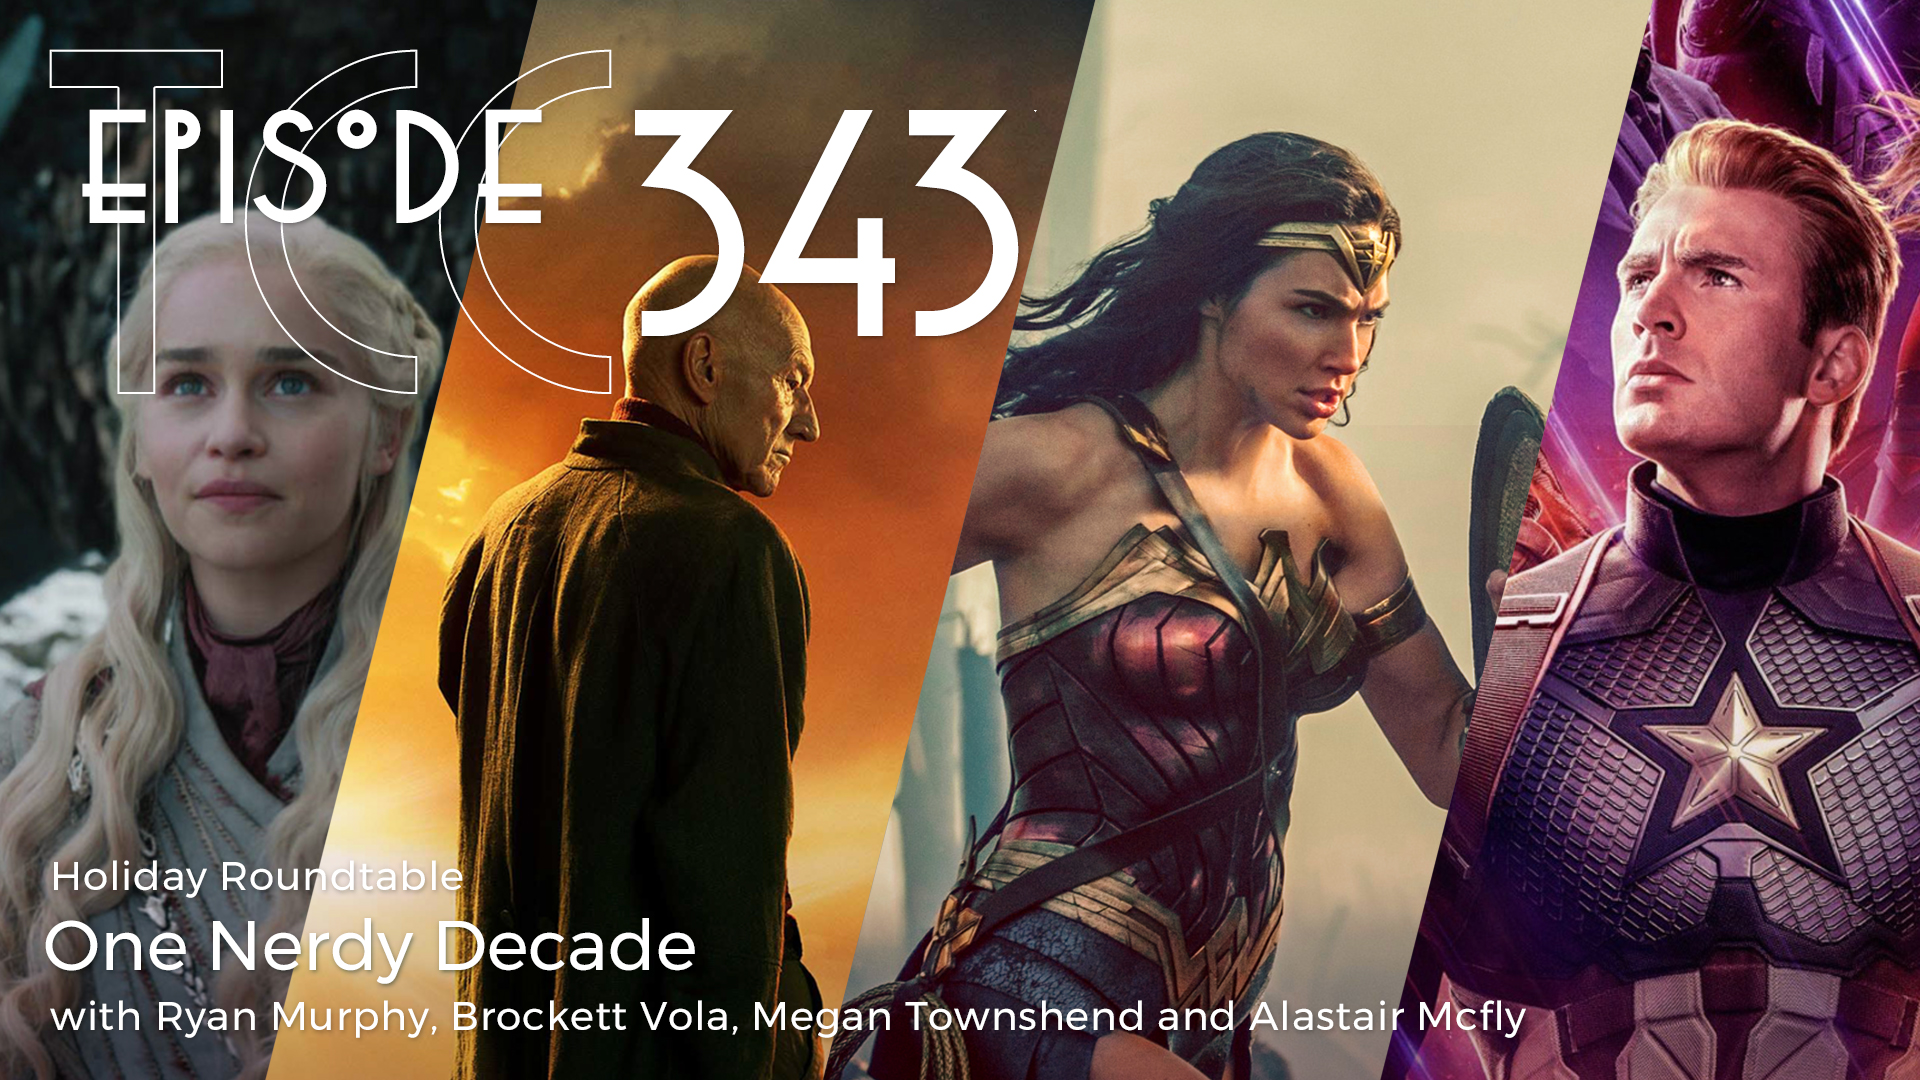 The Citadel Cafe 343: One Nerdy Decade